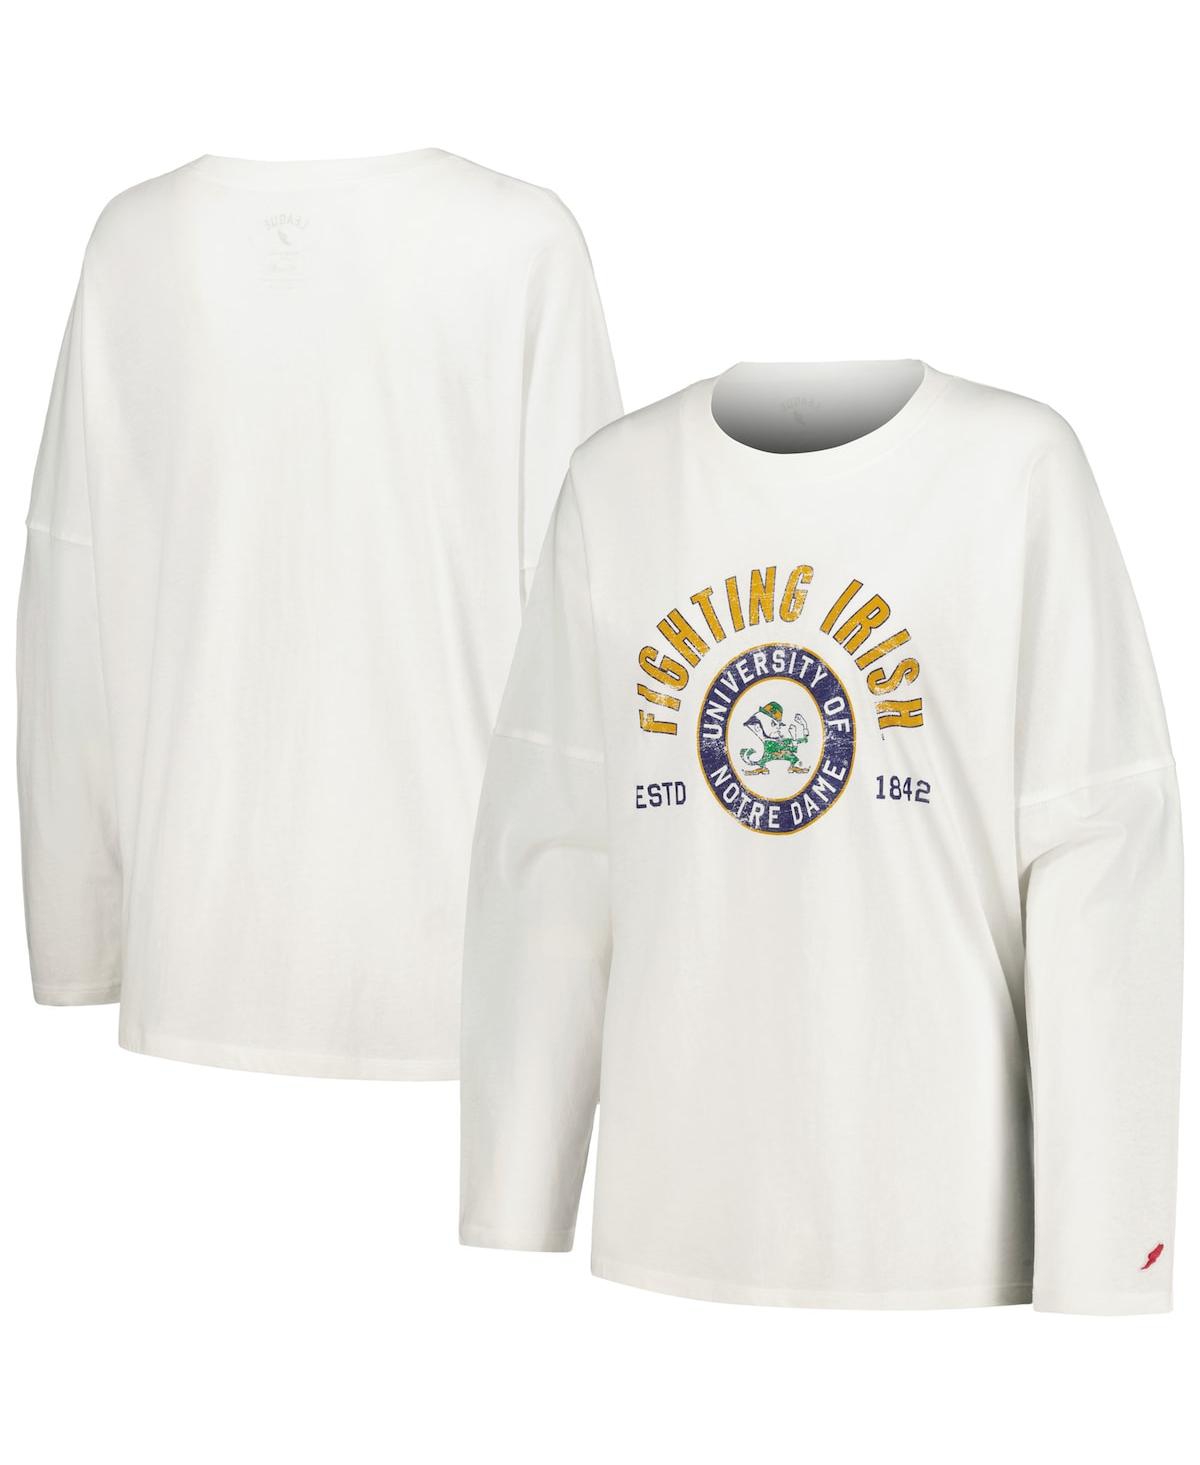 Women's League Collegiate Wear White Distressed Notre Dame Fighting Irish Clothesline Oversized Long Sleeve T-shirt - White